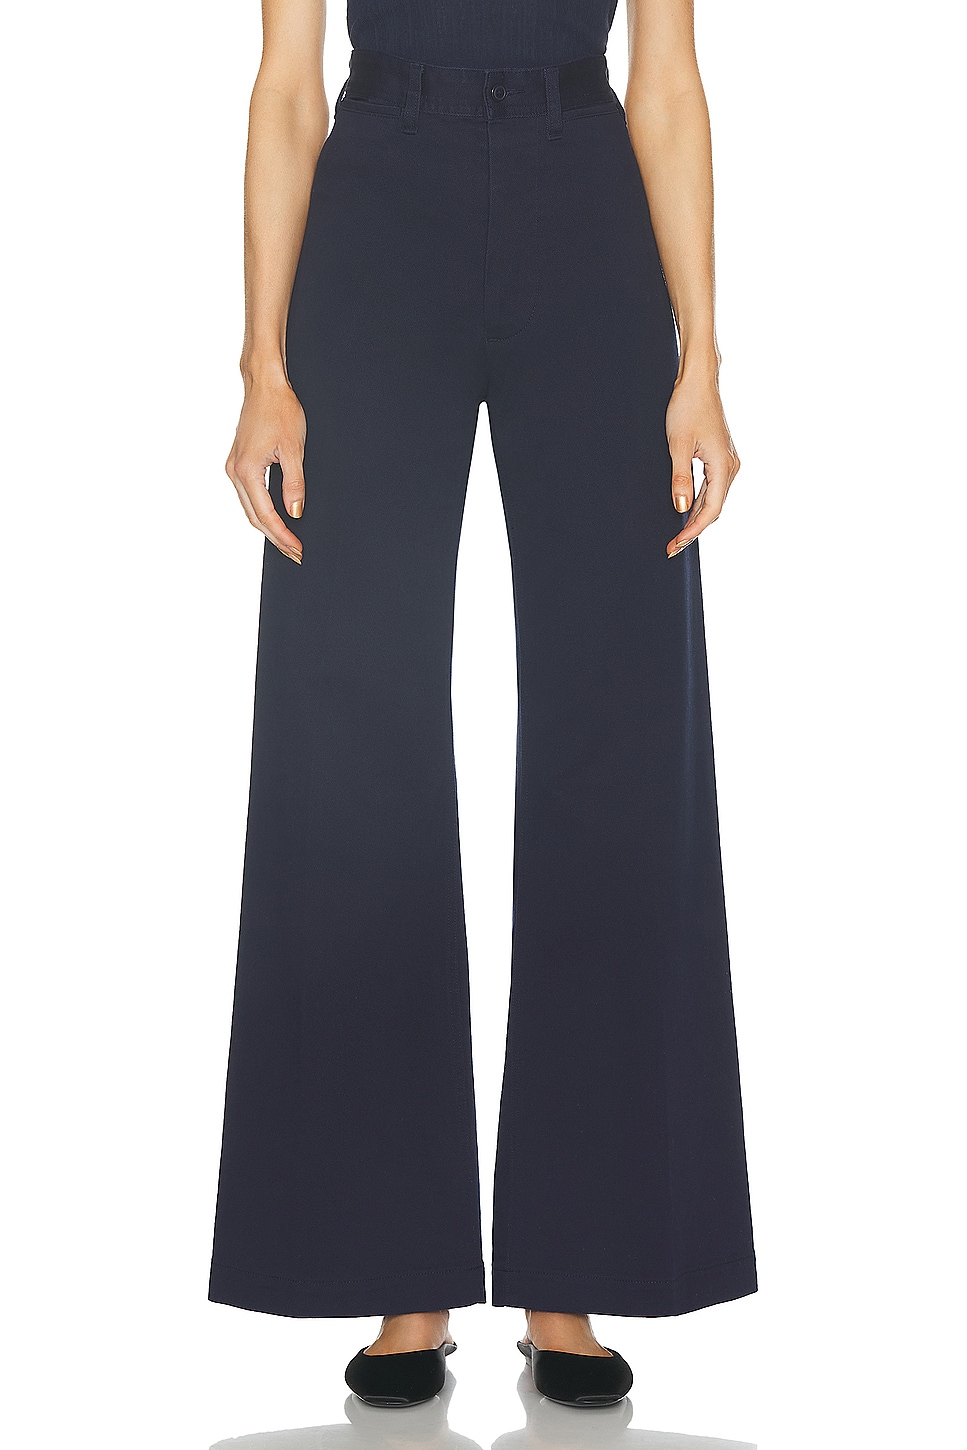 Image 1 of Polo Ralph Lauren Flat Front Pant in Cruise Navy